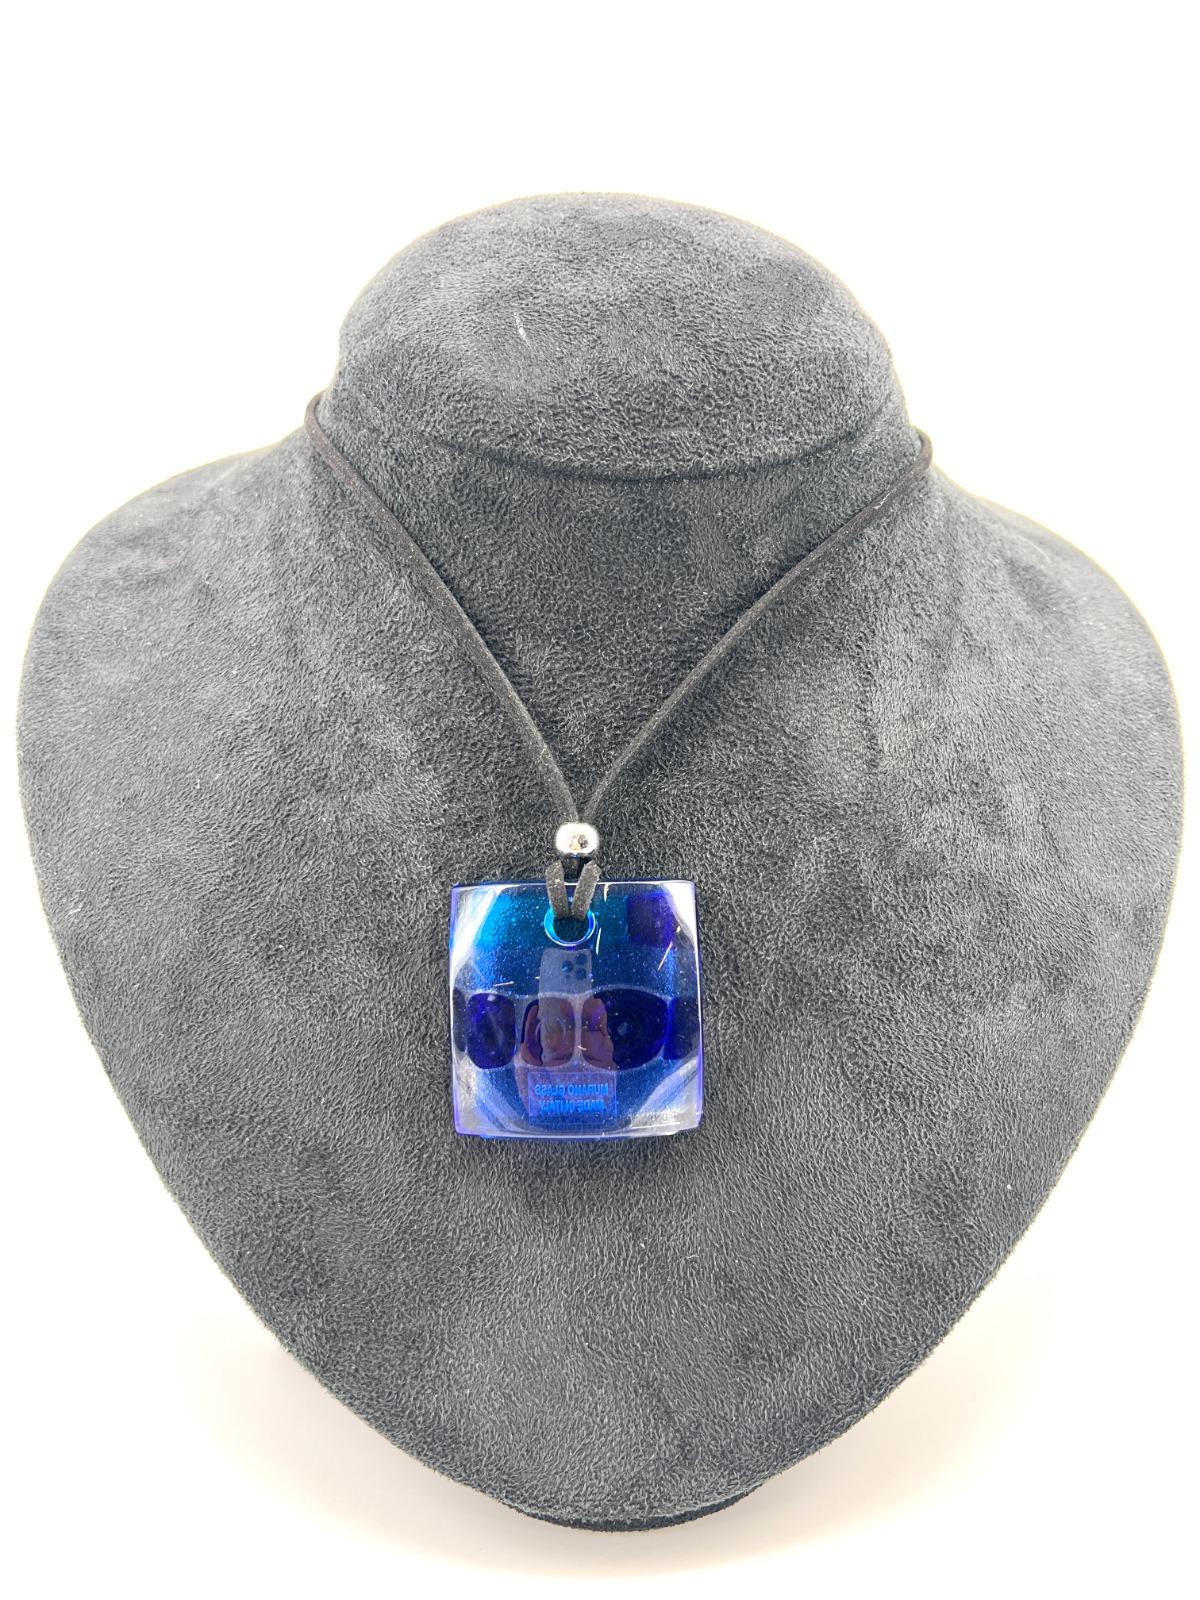 Artisan 3 pieces Murano Art Glass Pendant Necklace hand made in Murano Venice  For Sale